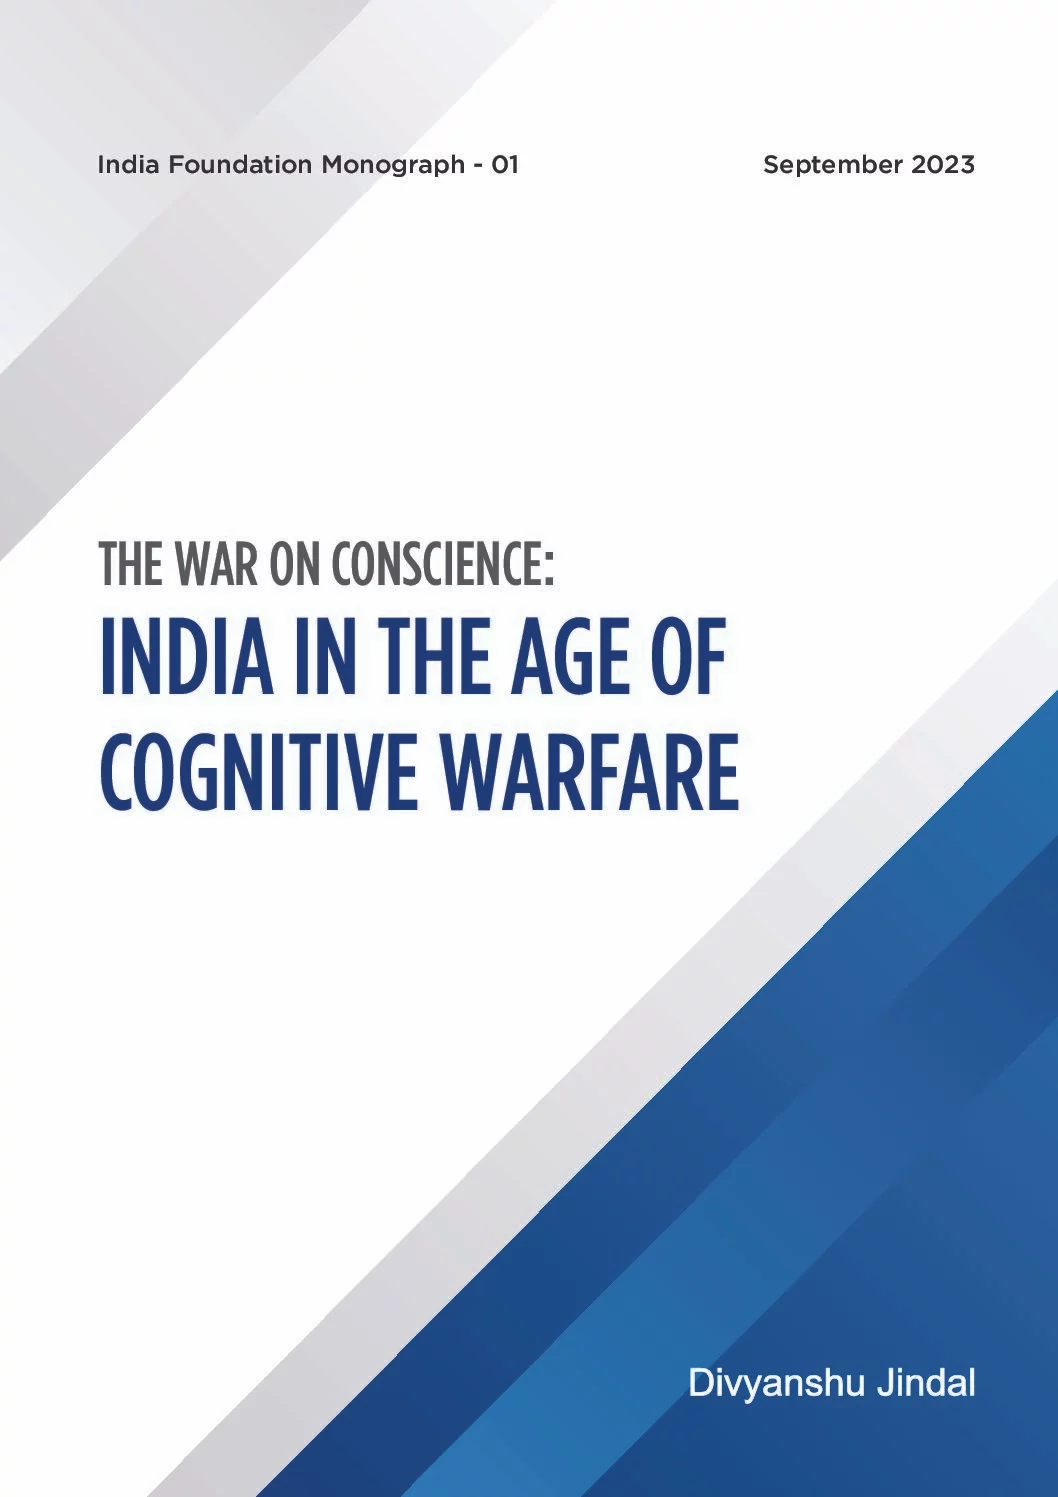 The war on conscience: India in the age of cognitive warfare